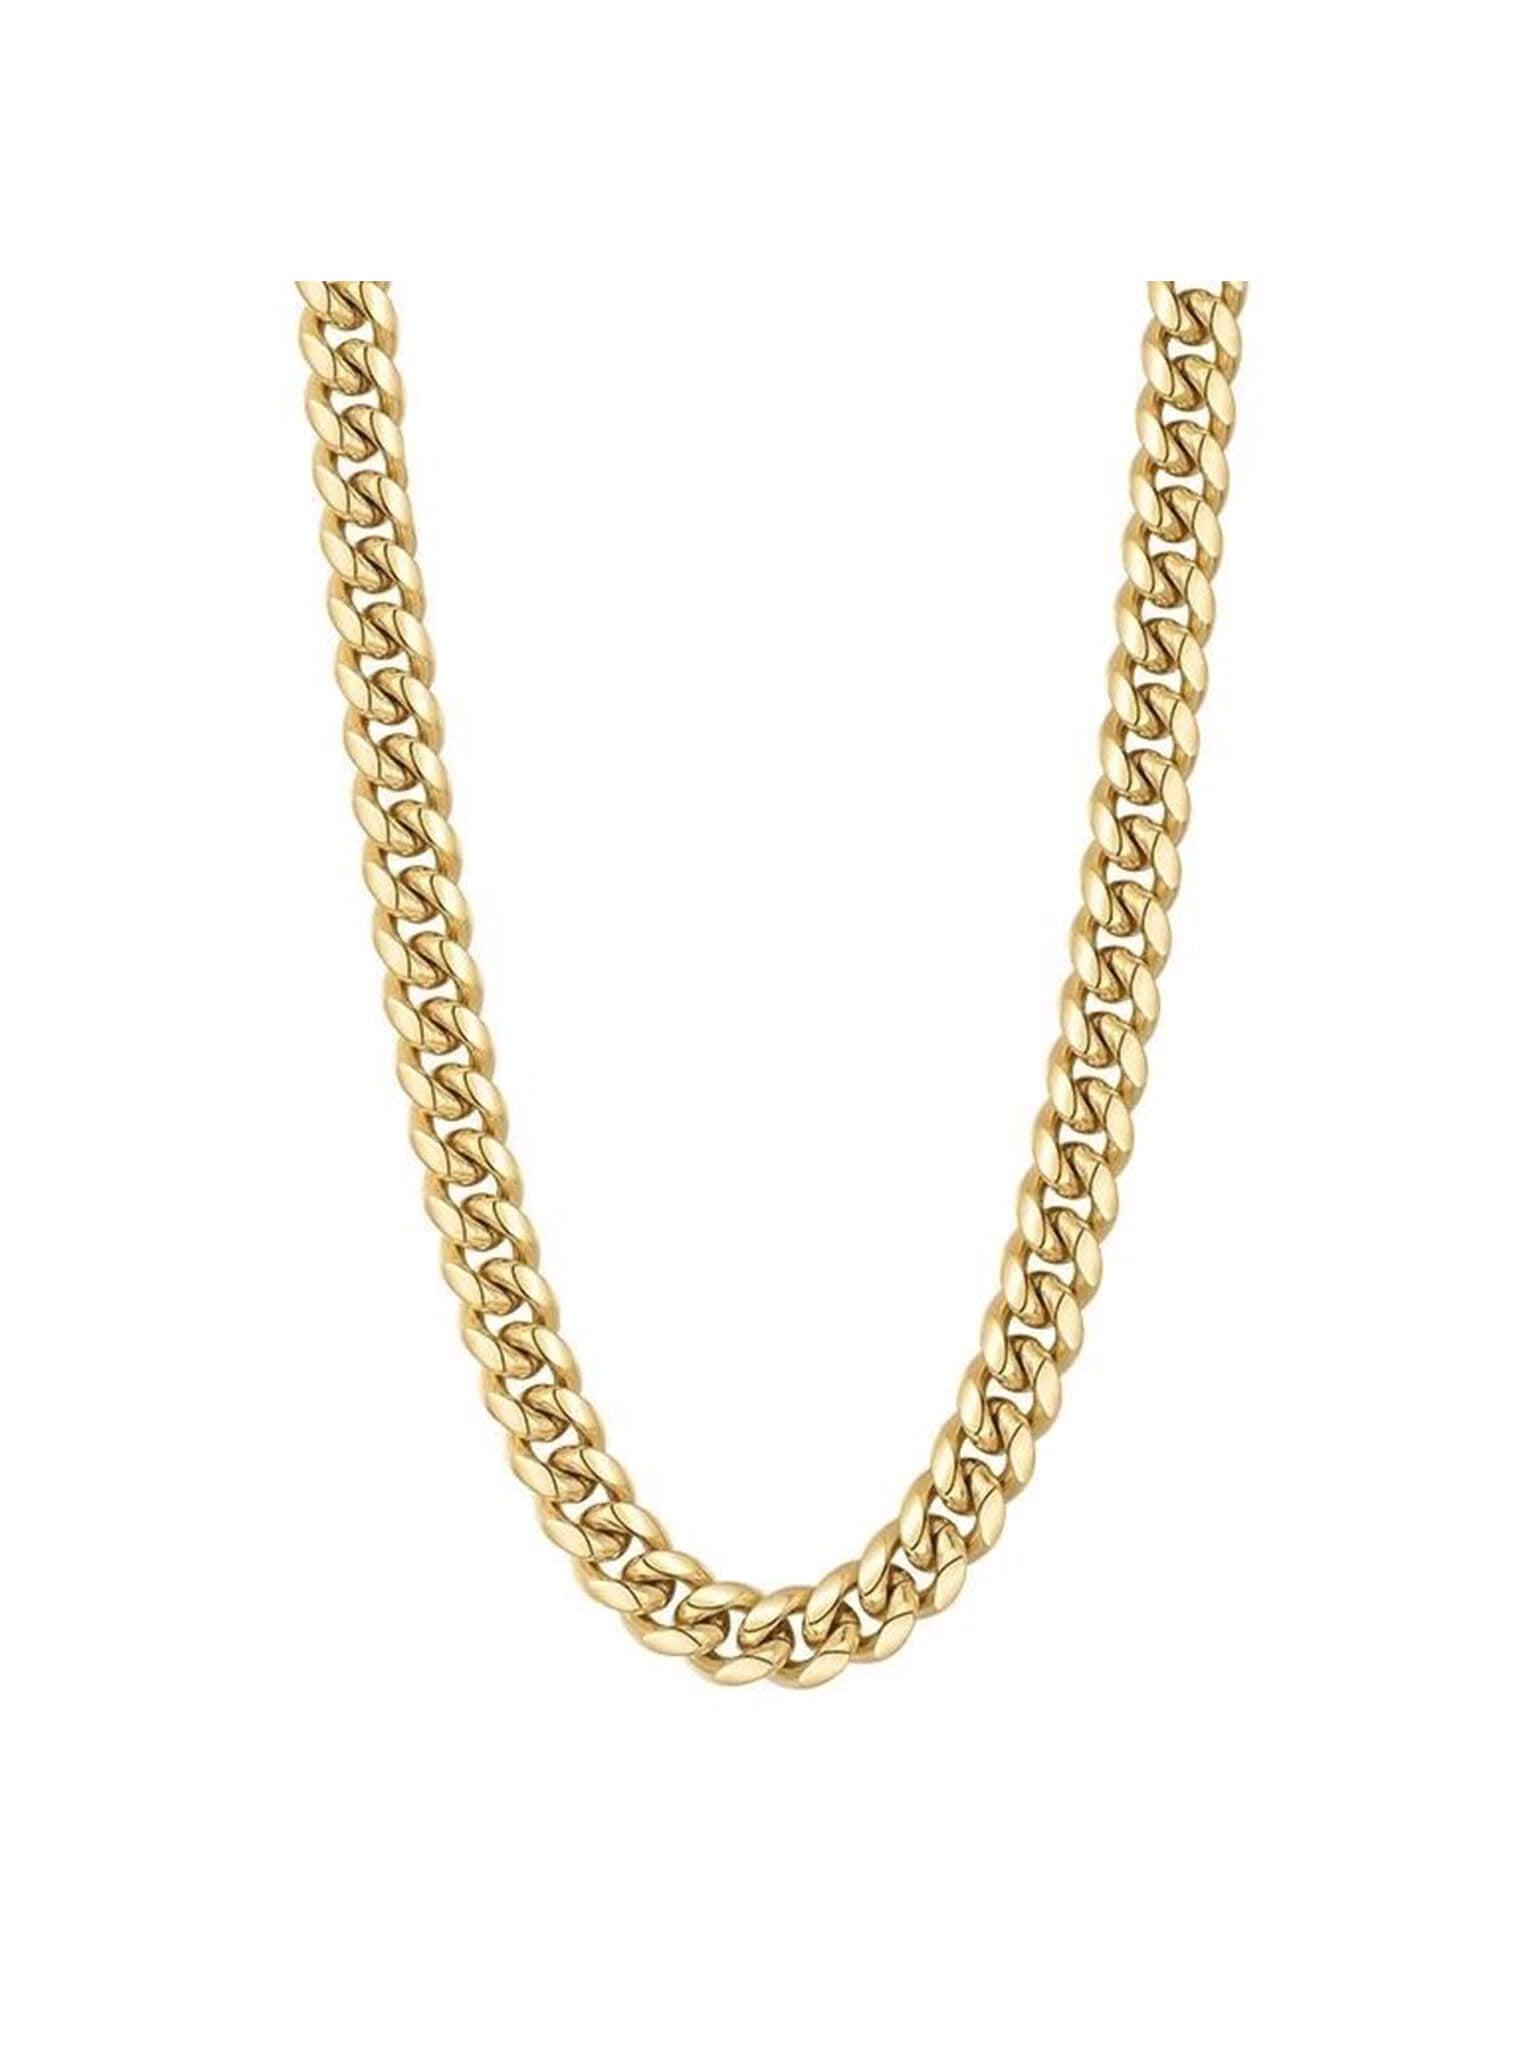 Chunky Gold Chain Necklaces Are a Must-Have for Summer